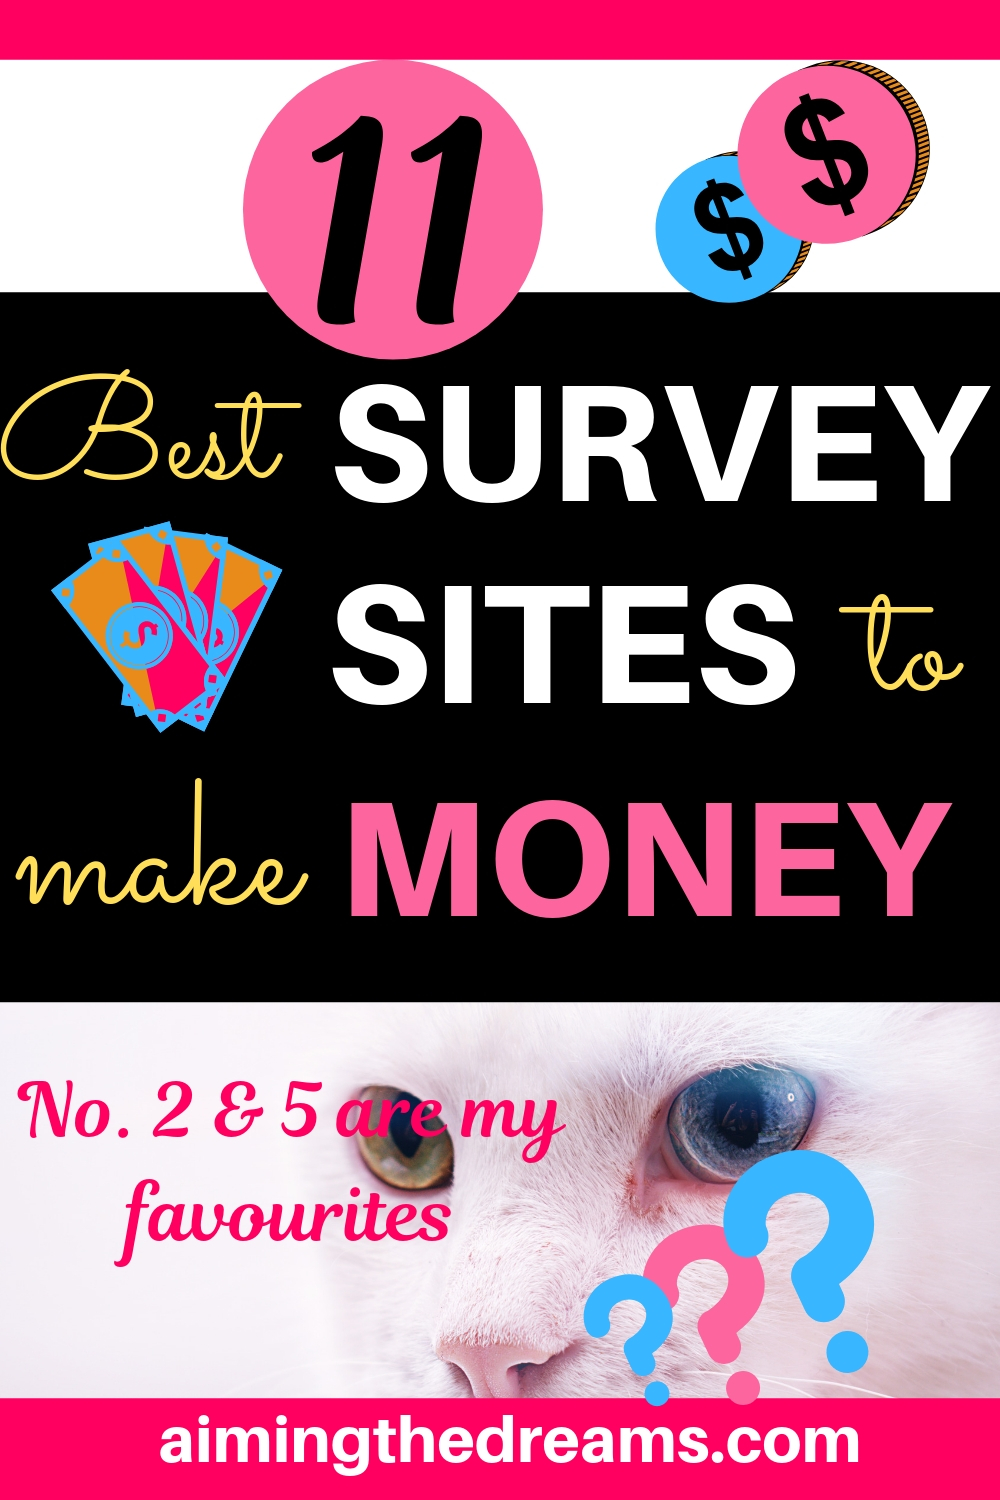 11 best survey sites to make money and earn income online as side hustle. 